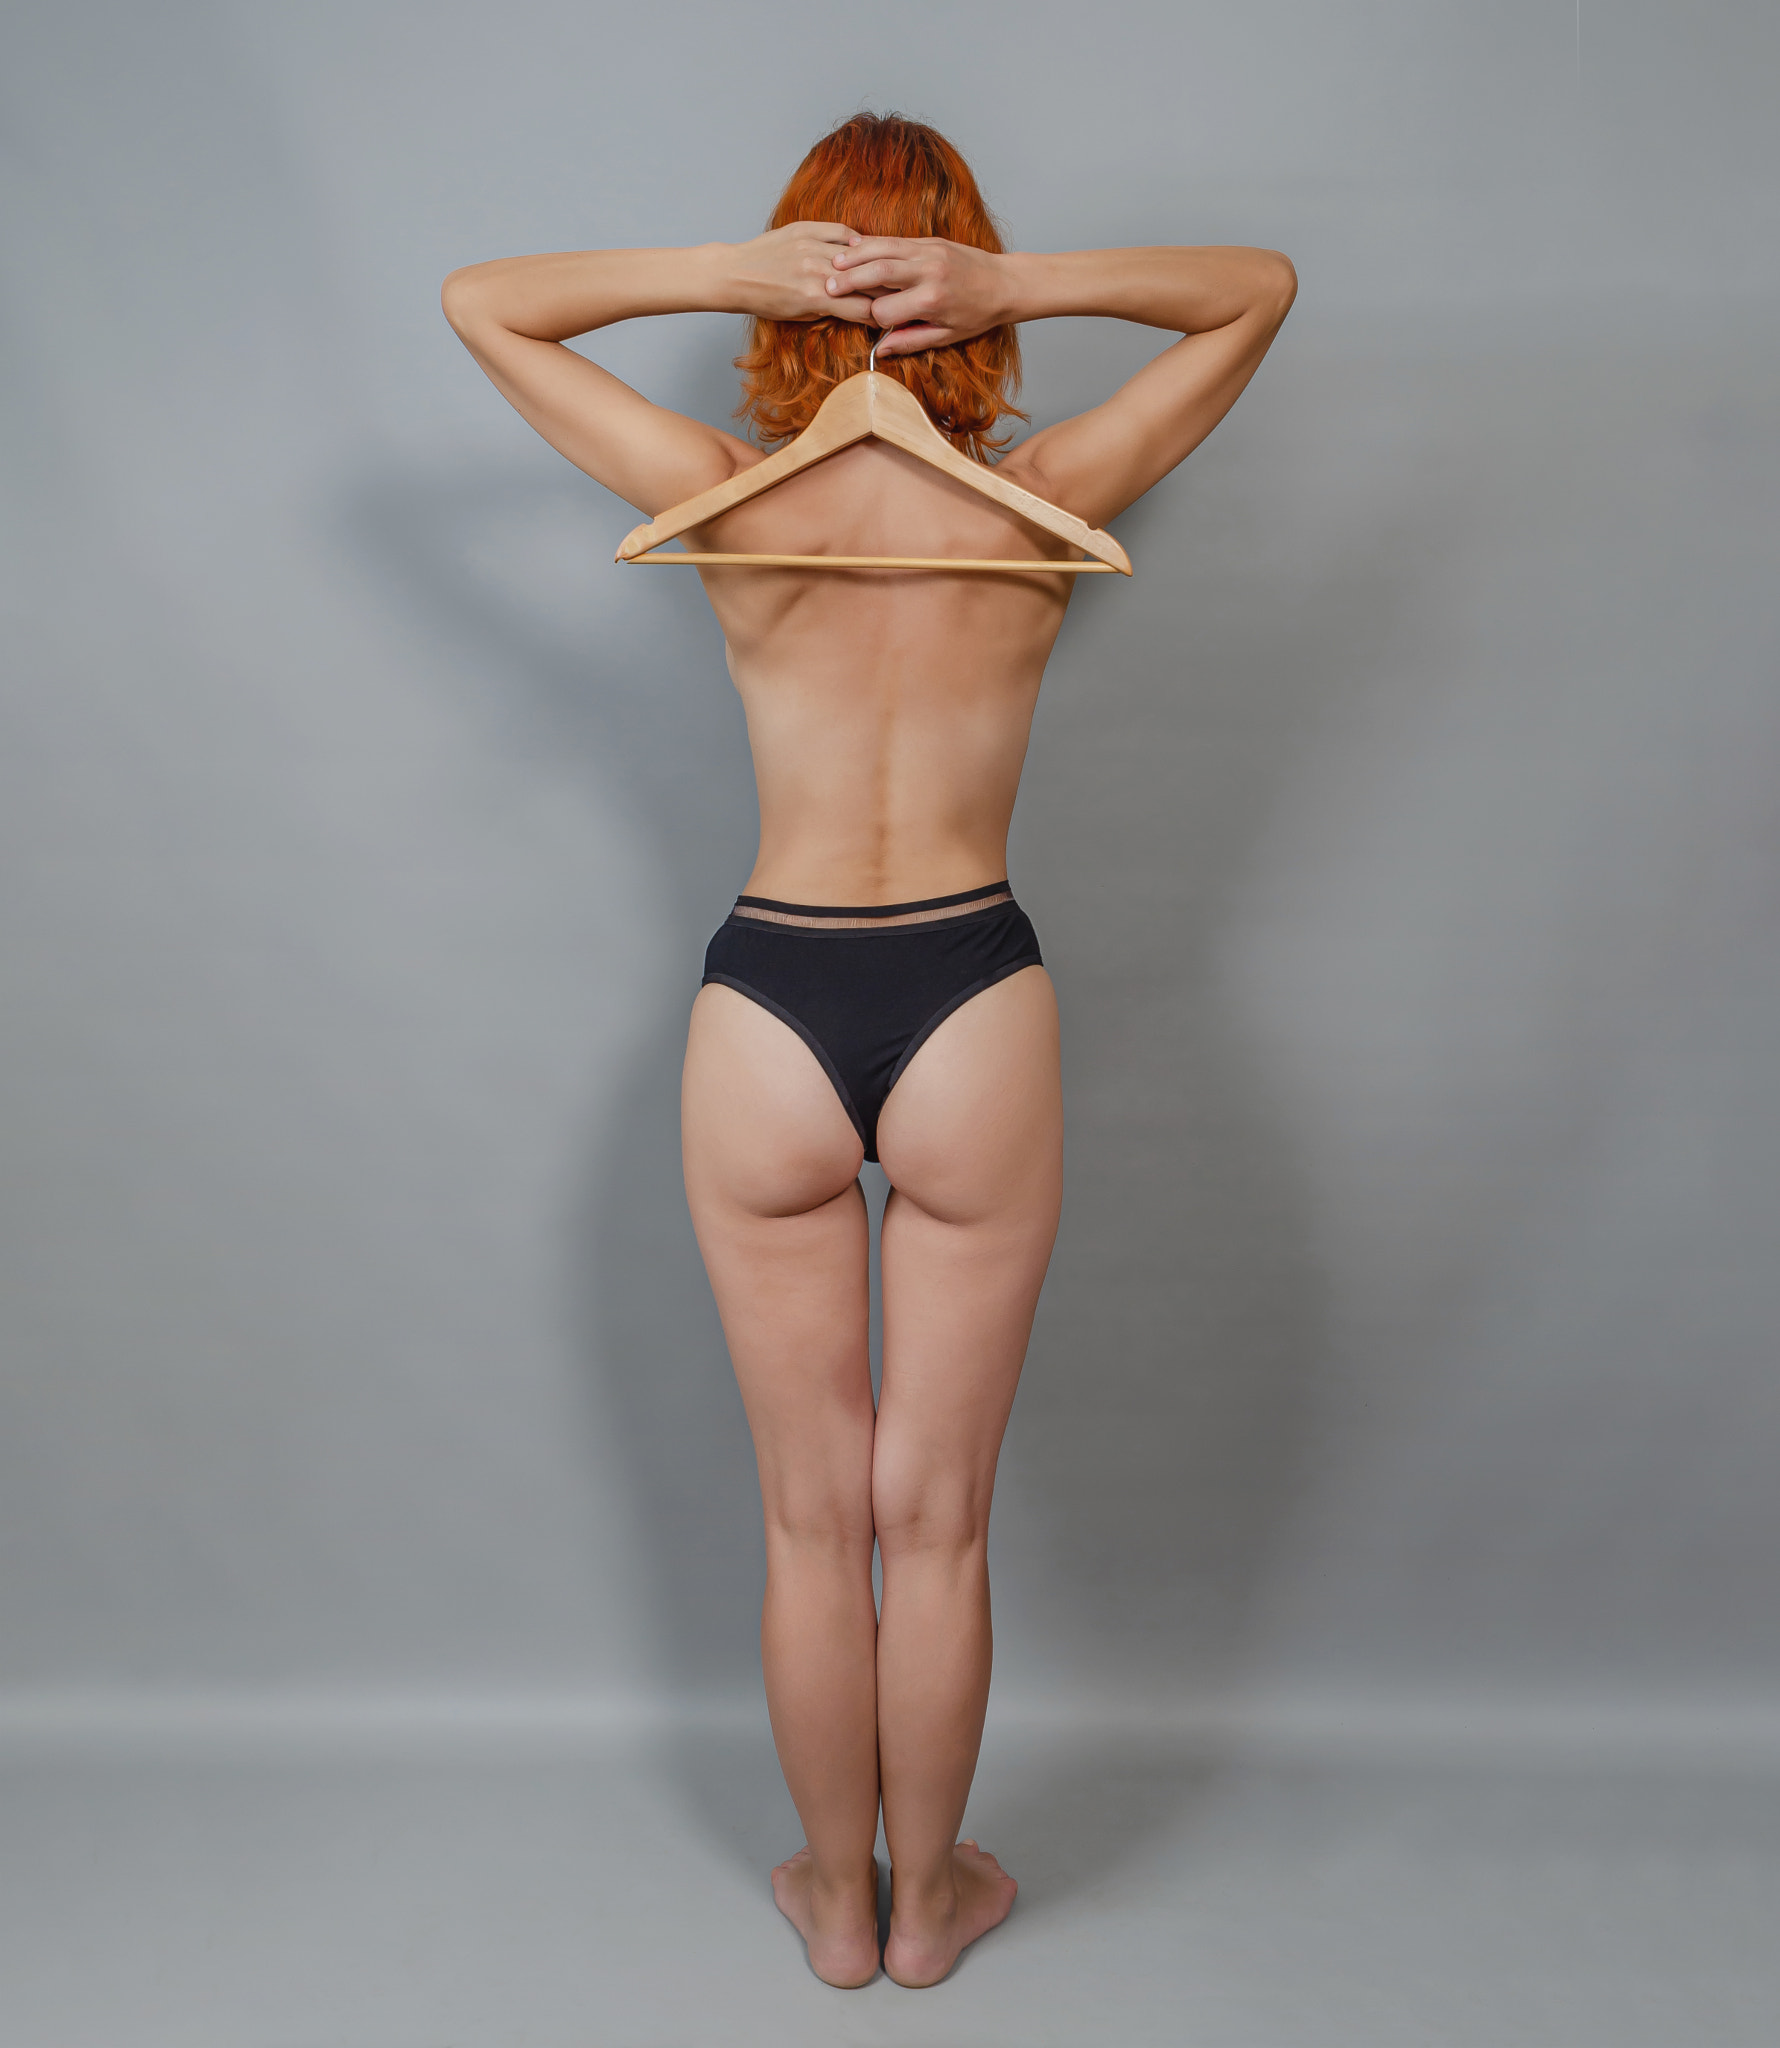 Health of the back, spine. The concept of slimness. A naked young woman holds an empty hanger